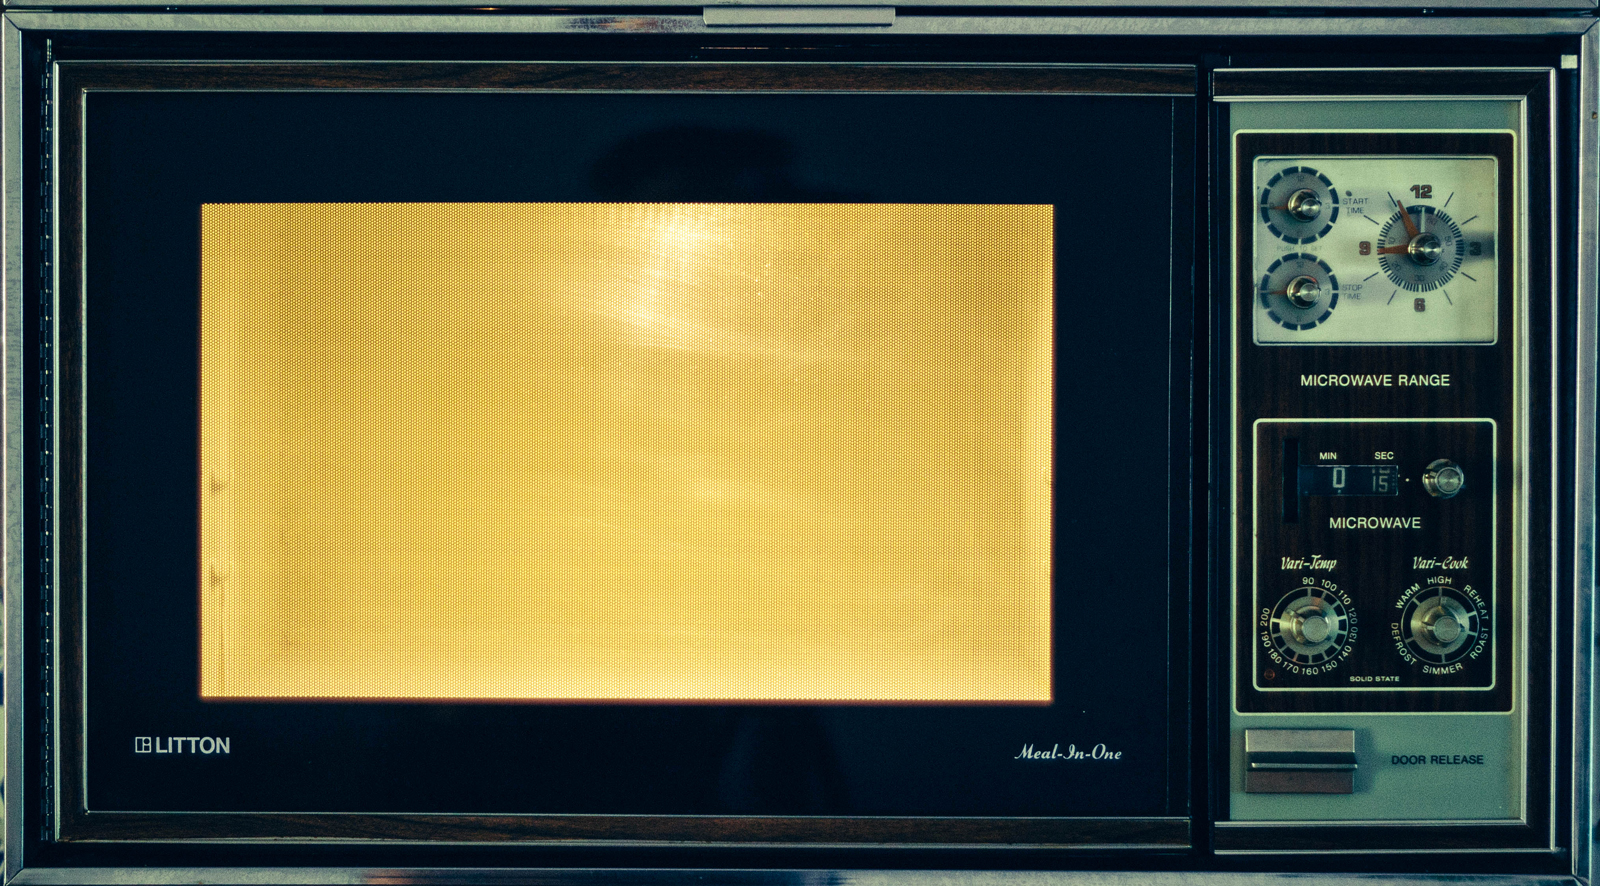 A photo of an old microwave oven in use.